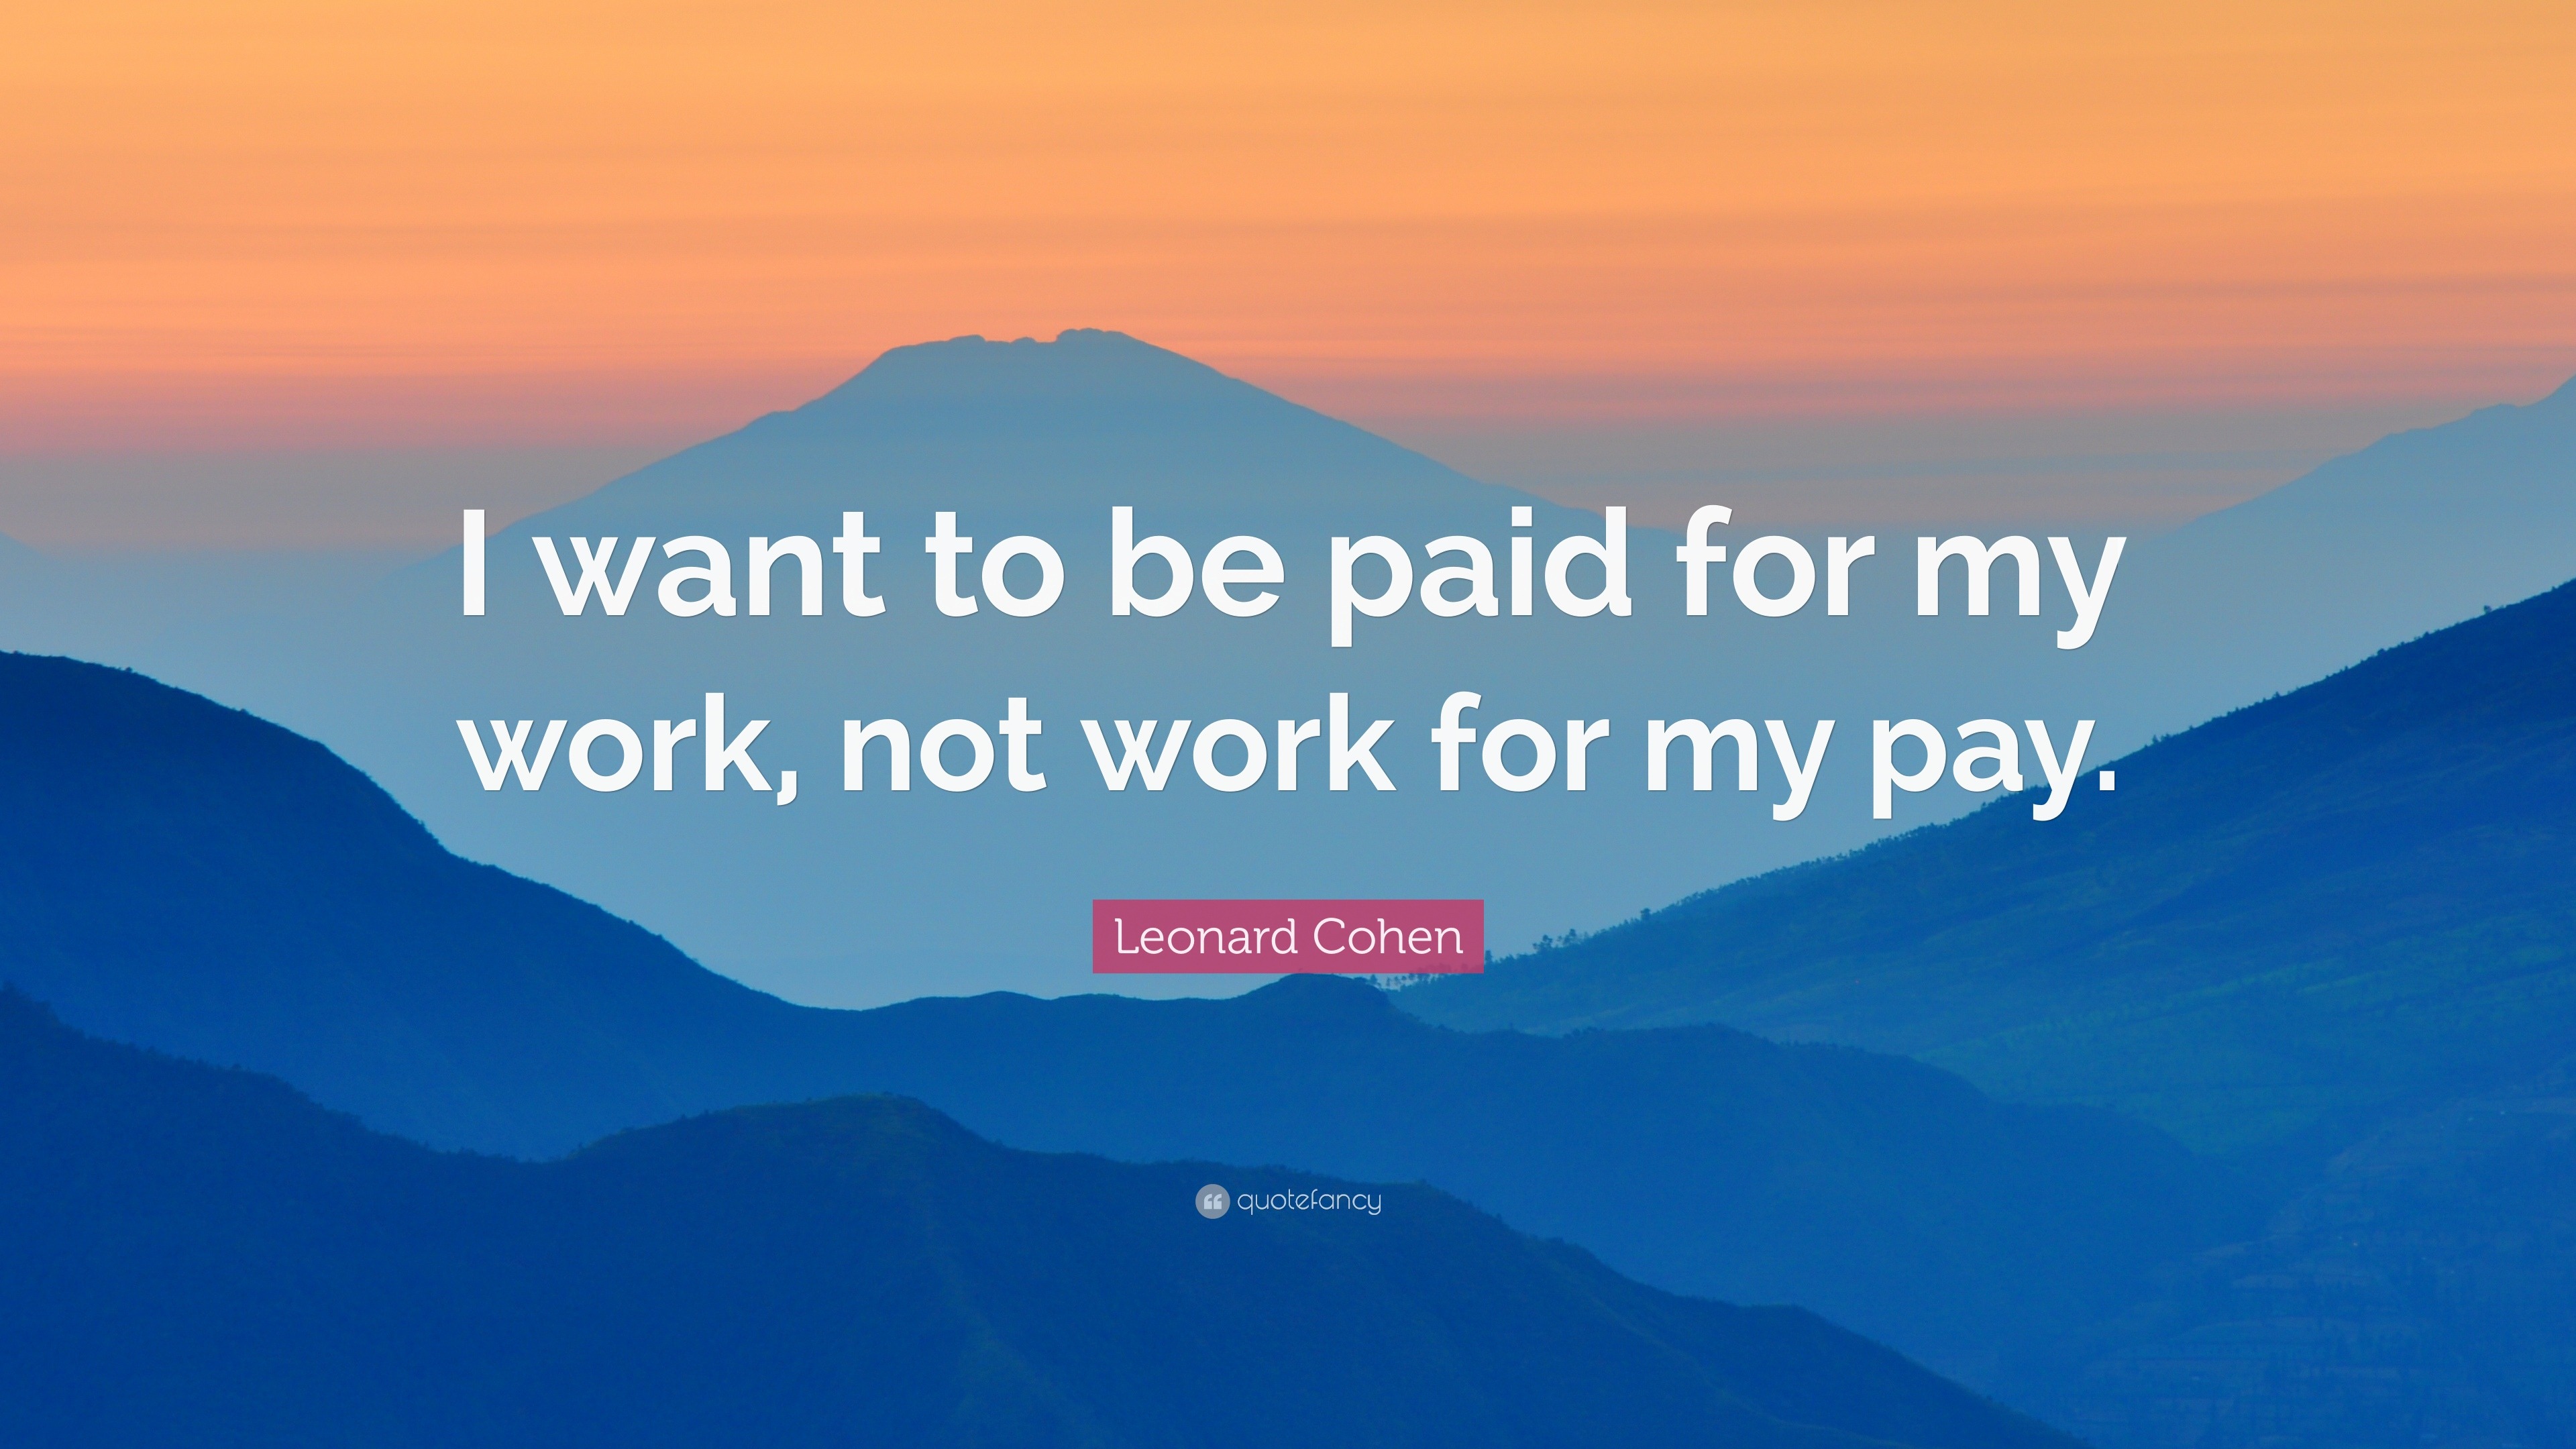 Leonard Cohen Quote: “I want to be paid for my work, not work for 